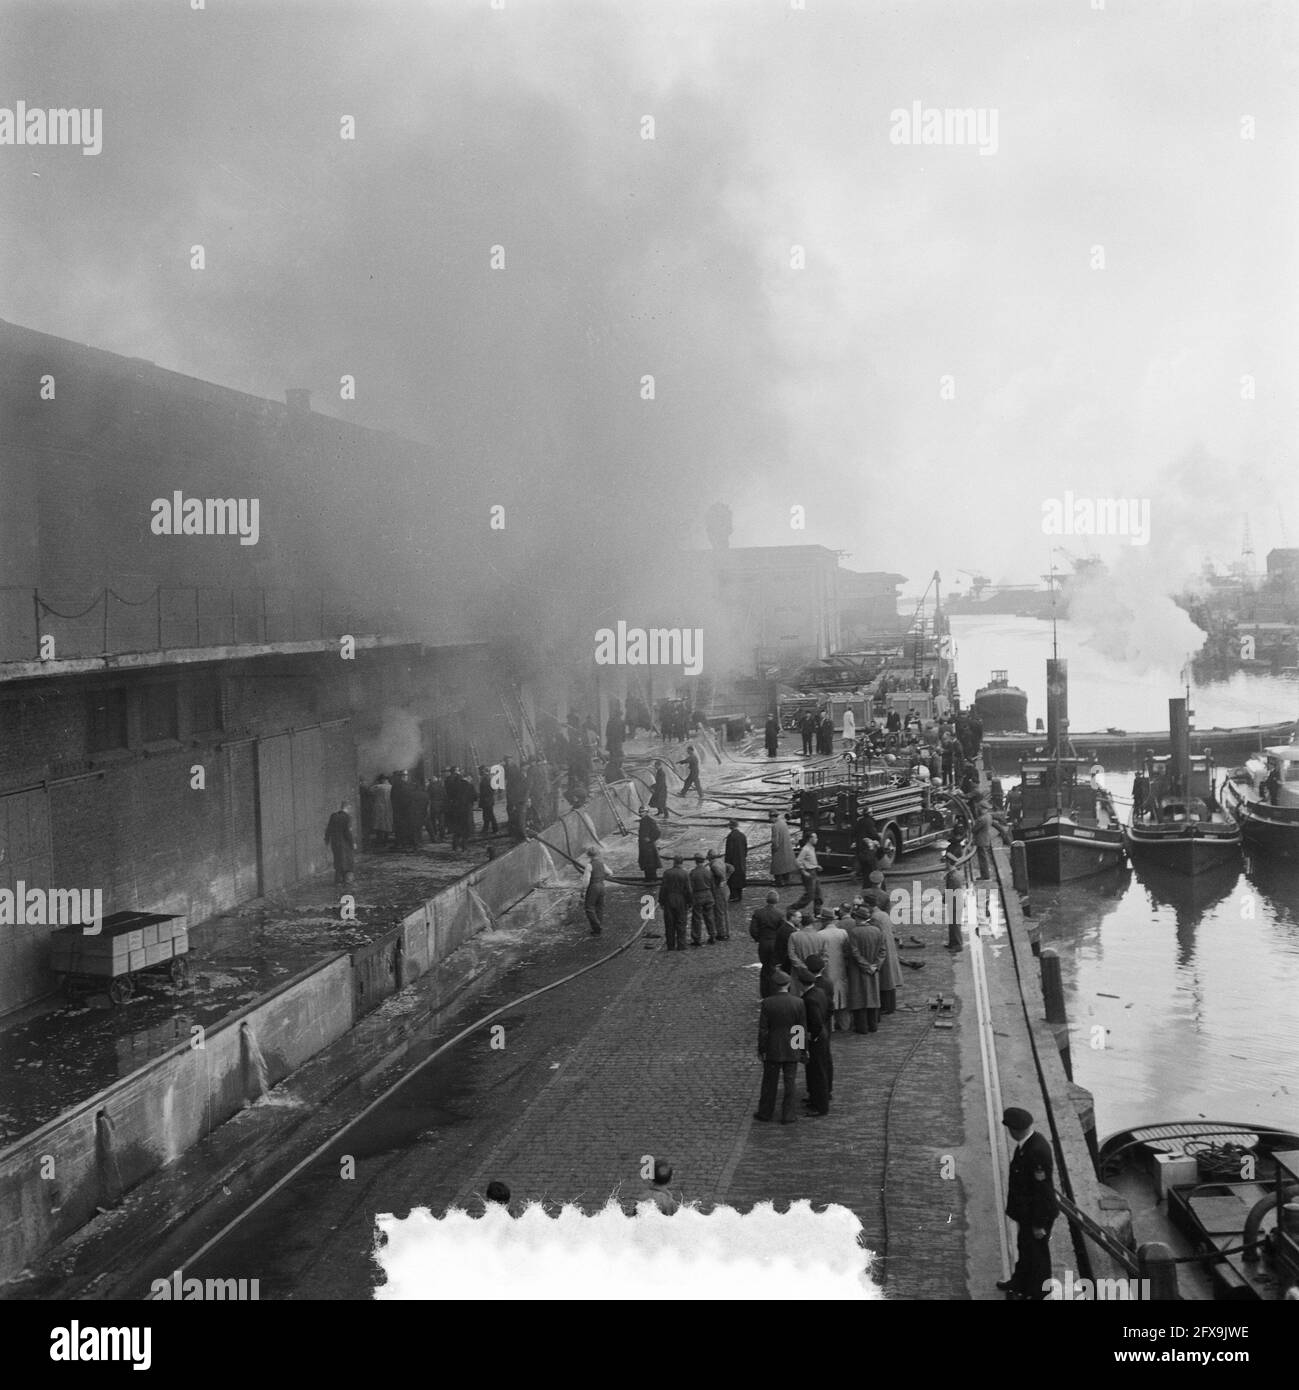 Fire Thomsens Port Authority Rotterdam, 28 September 1951, fires, The Netherlands, 20th century press agency photo, news to remember, documentary, historic photography 1945-1990, visual stories, human history of the Twentieth Century, capturing moments in time Stock Photo